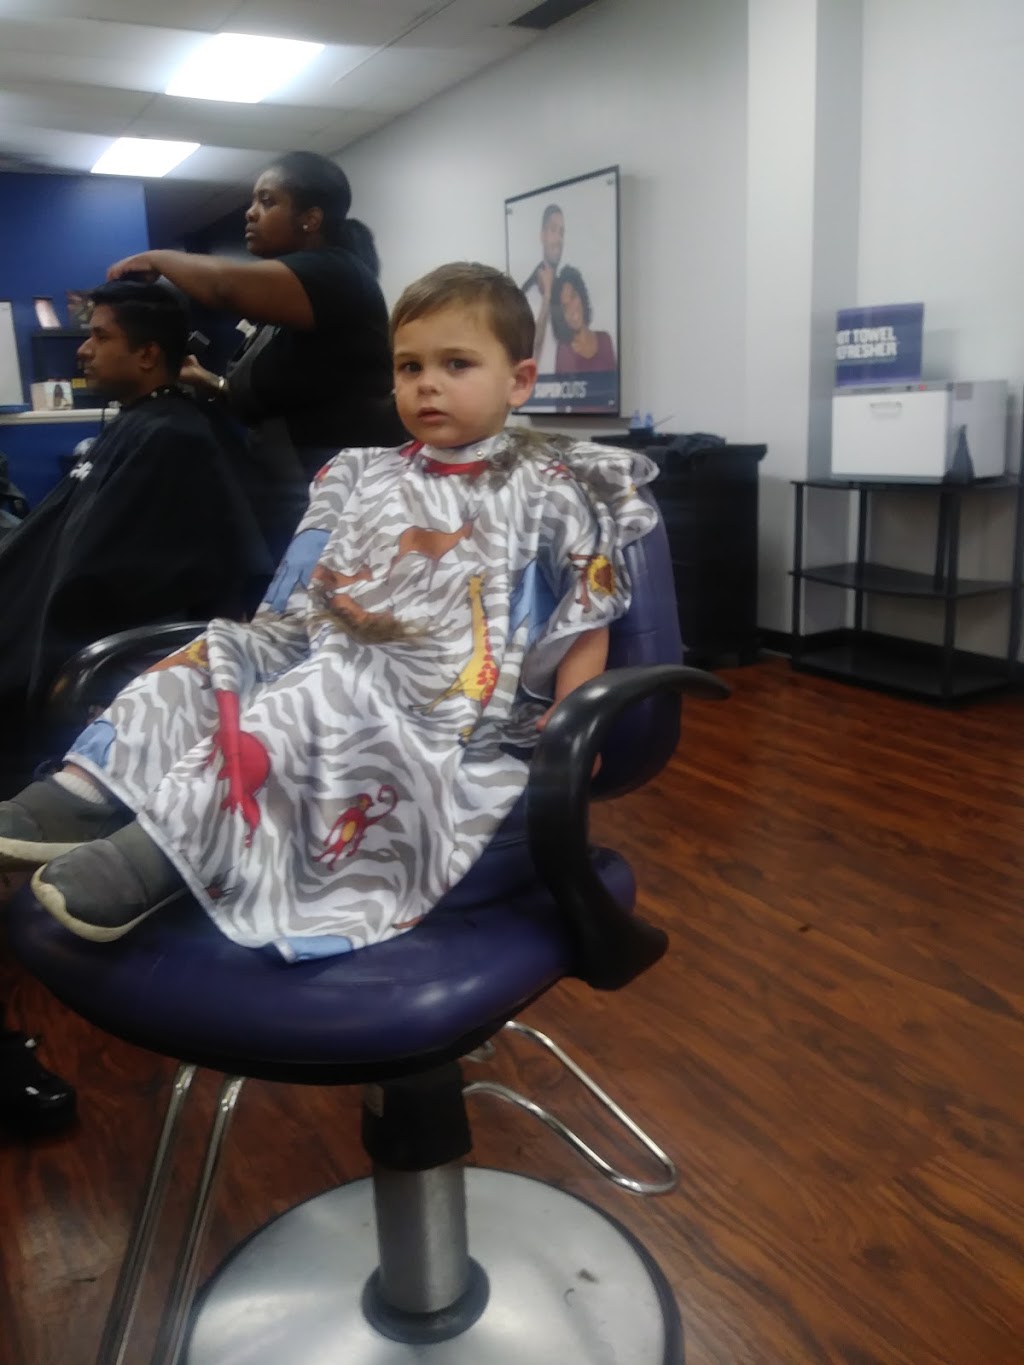 Supercuts | 314 S Henderson Rd #1080, King of Prussia, PA 19406 | Phone: (610) 337-3738